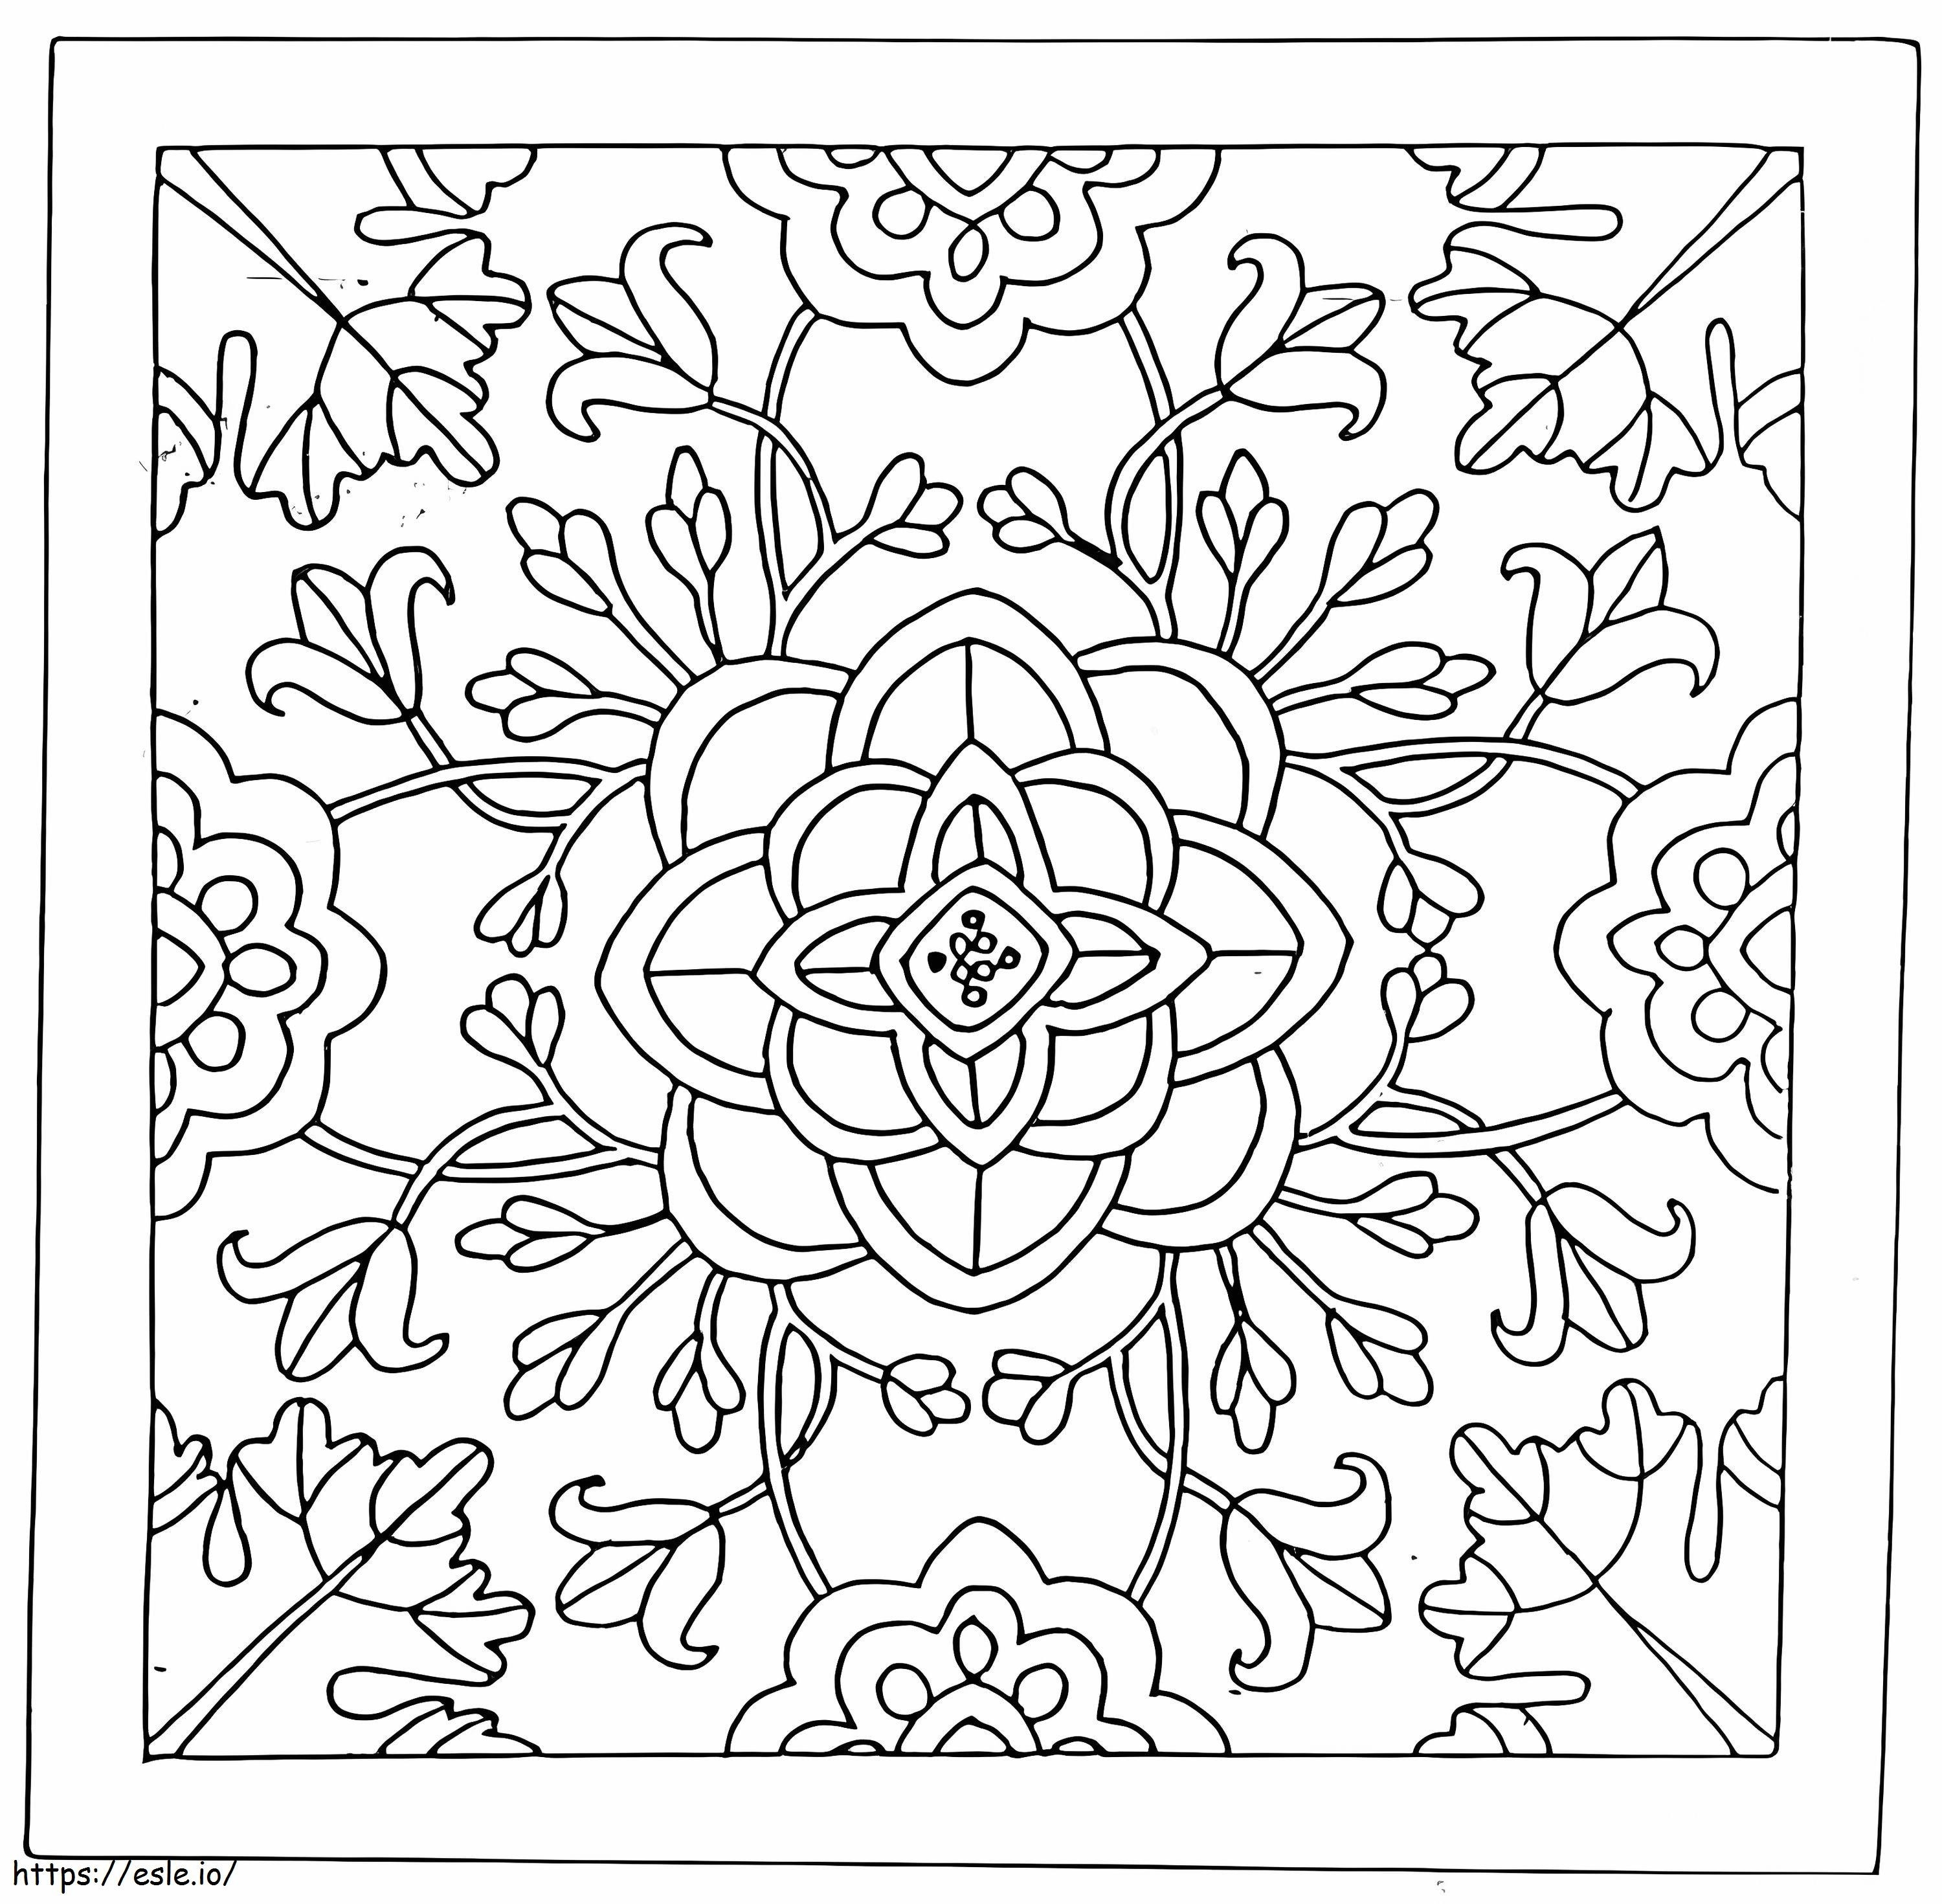 Mandala With Flowers coloring page